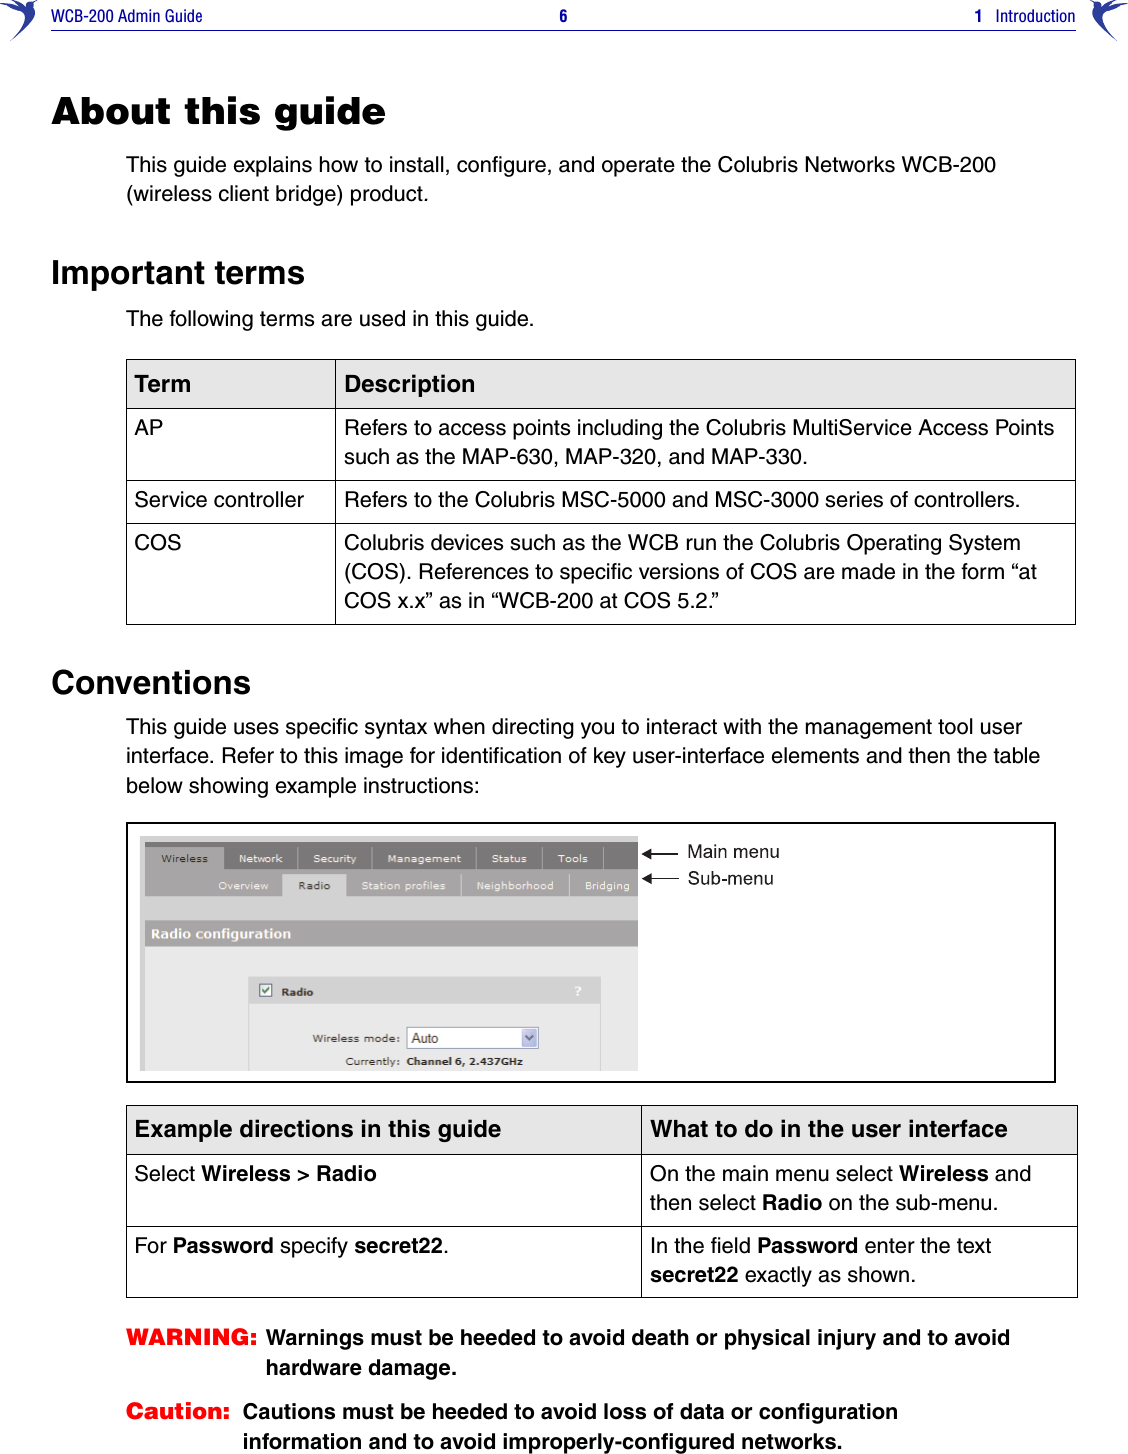 WCB-200 Admin Guide 6 1   IntroductionAbout this guideThis guide explains how to install, configure, and operate the Colubris Networks WCB-200 (wireless client bridge) product.Important termsThe following terms are used in this guide. ConventionsThis guide uses specific syntax when directing you to interact with the management tool user interface. Refer to this image for identification of key user-interface elements and then the table below showing example instructions:WARNING: Warnings must be heeded to avoid death or physical injury and to avoid hardware damage.Caution: Cautions must be heeded to avoid loss of data or configuration information and to avoid improperly-configured networks.Term DescriptionAP Refers to access points including the Colubris MultiService Access Points such as the MAP-630, MAP-320, and MAP-330.Service controller Refers to the Colubris MSC-5000 and MSC-3000 series of controllers.COS Colubris devices such as the WCB run the Colubris Operating System (COS). References to specific versions of COS are made in the form “at COS x.x” as in “WCB-200 at COS 5.2.”Example directions in this guide What to do in the user interfaceSelect Wireless &gt; Radio On the main menu select Wireless and then select Radio on the sub-menu. For Password specify secret22. In the field Password enter the text secret22 exactly as shown.